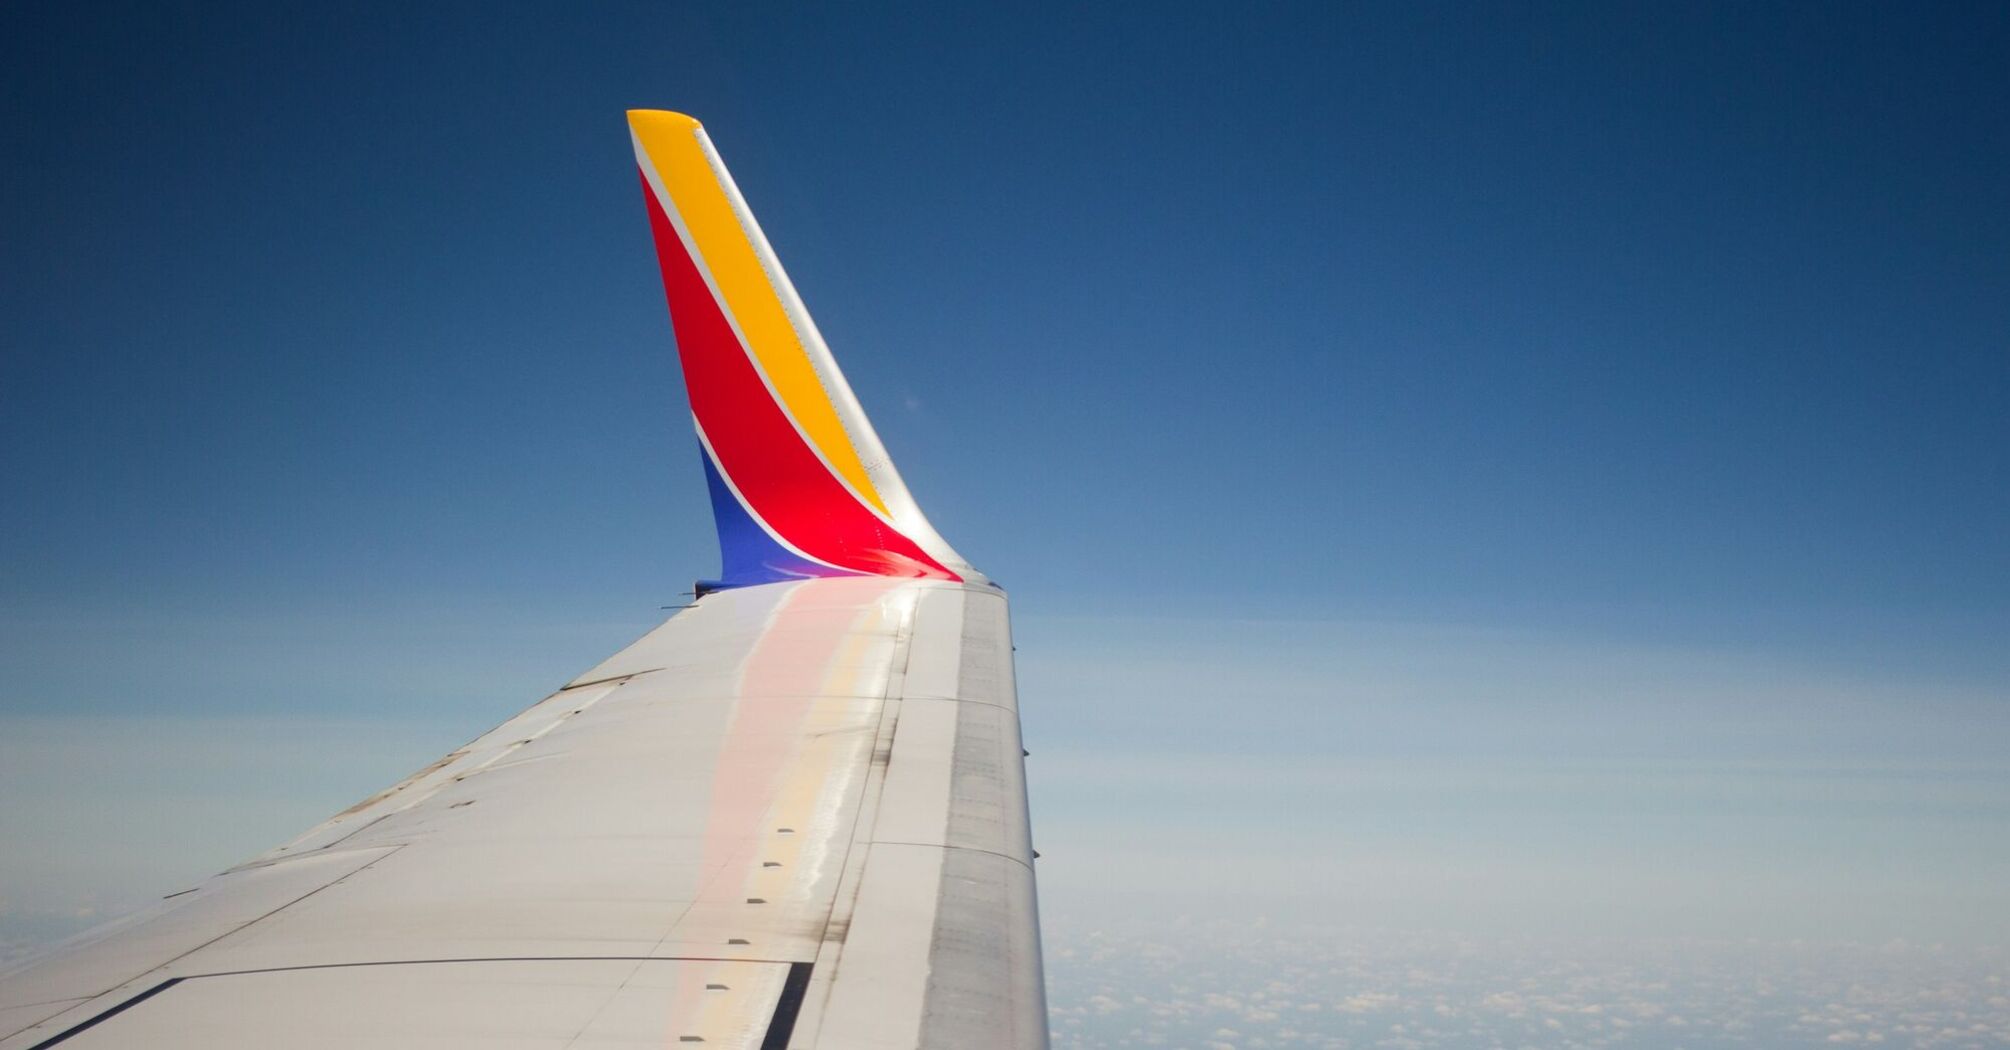 Southwest Airlines wing in flight over clouds